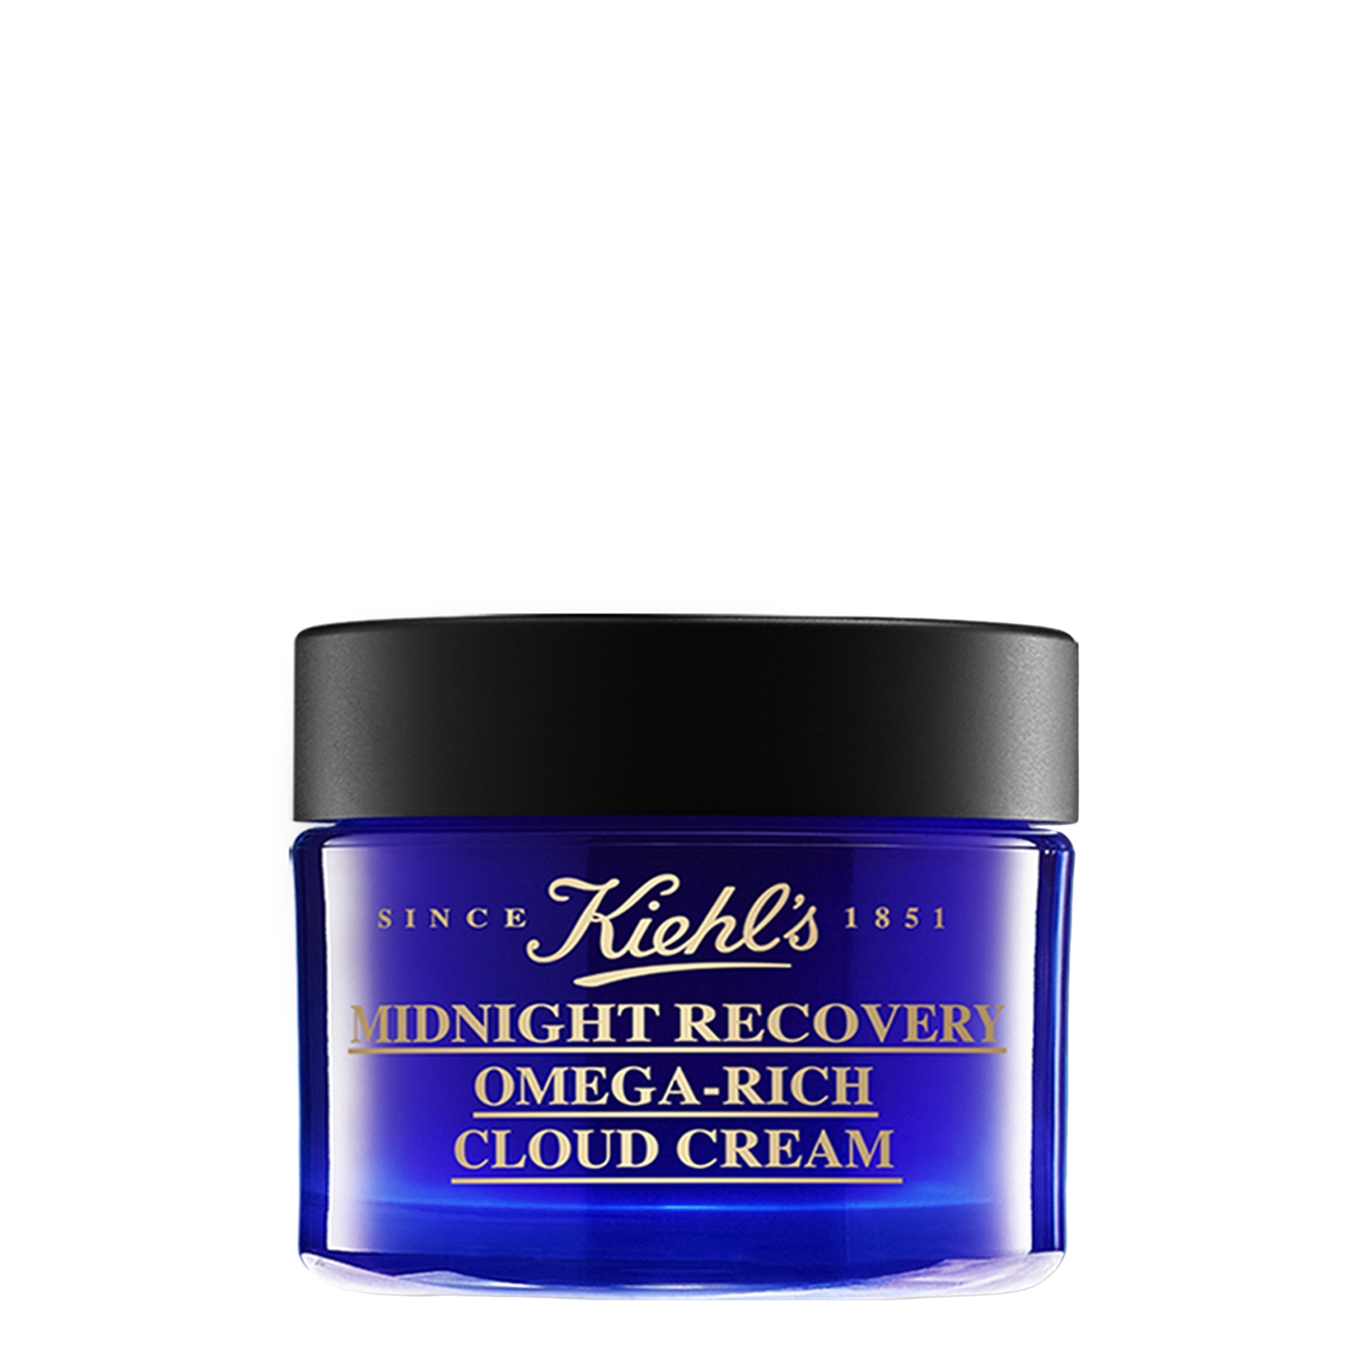 Kiehl's Midnight Recovery Omega-Rich Cloud Cream